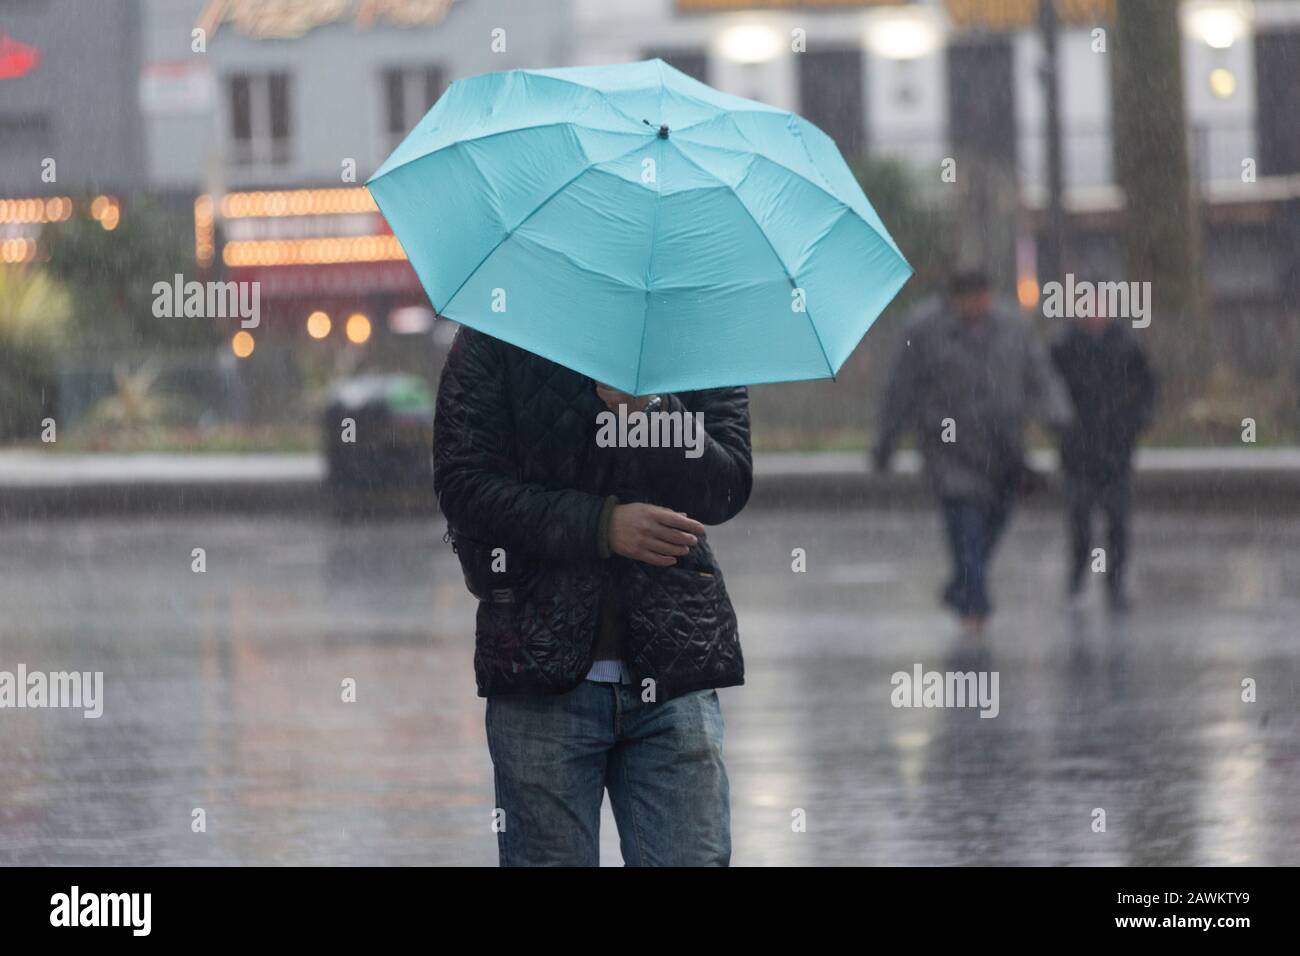 UK Weather, London - 9 February 2020. Storm Ciara brings gale force winds and heavy rain to the London’s West End Theatreland district. Credit: Thamesfleet/Alamy Live News Stock Photo